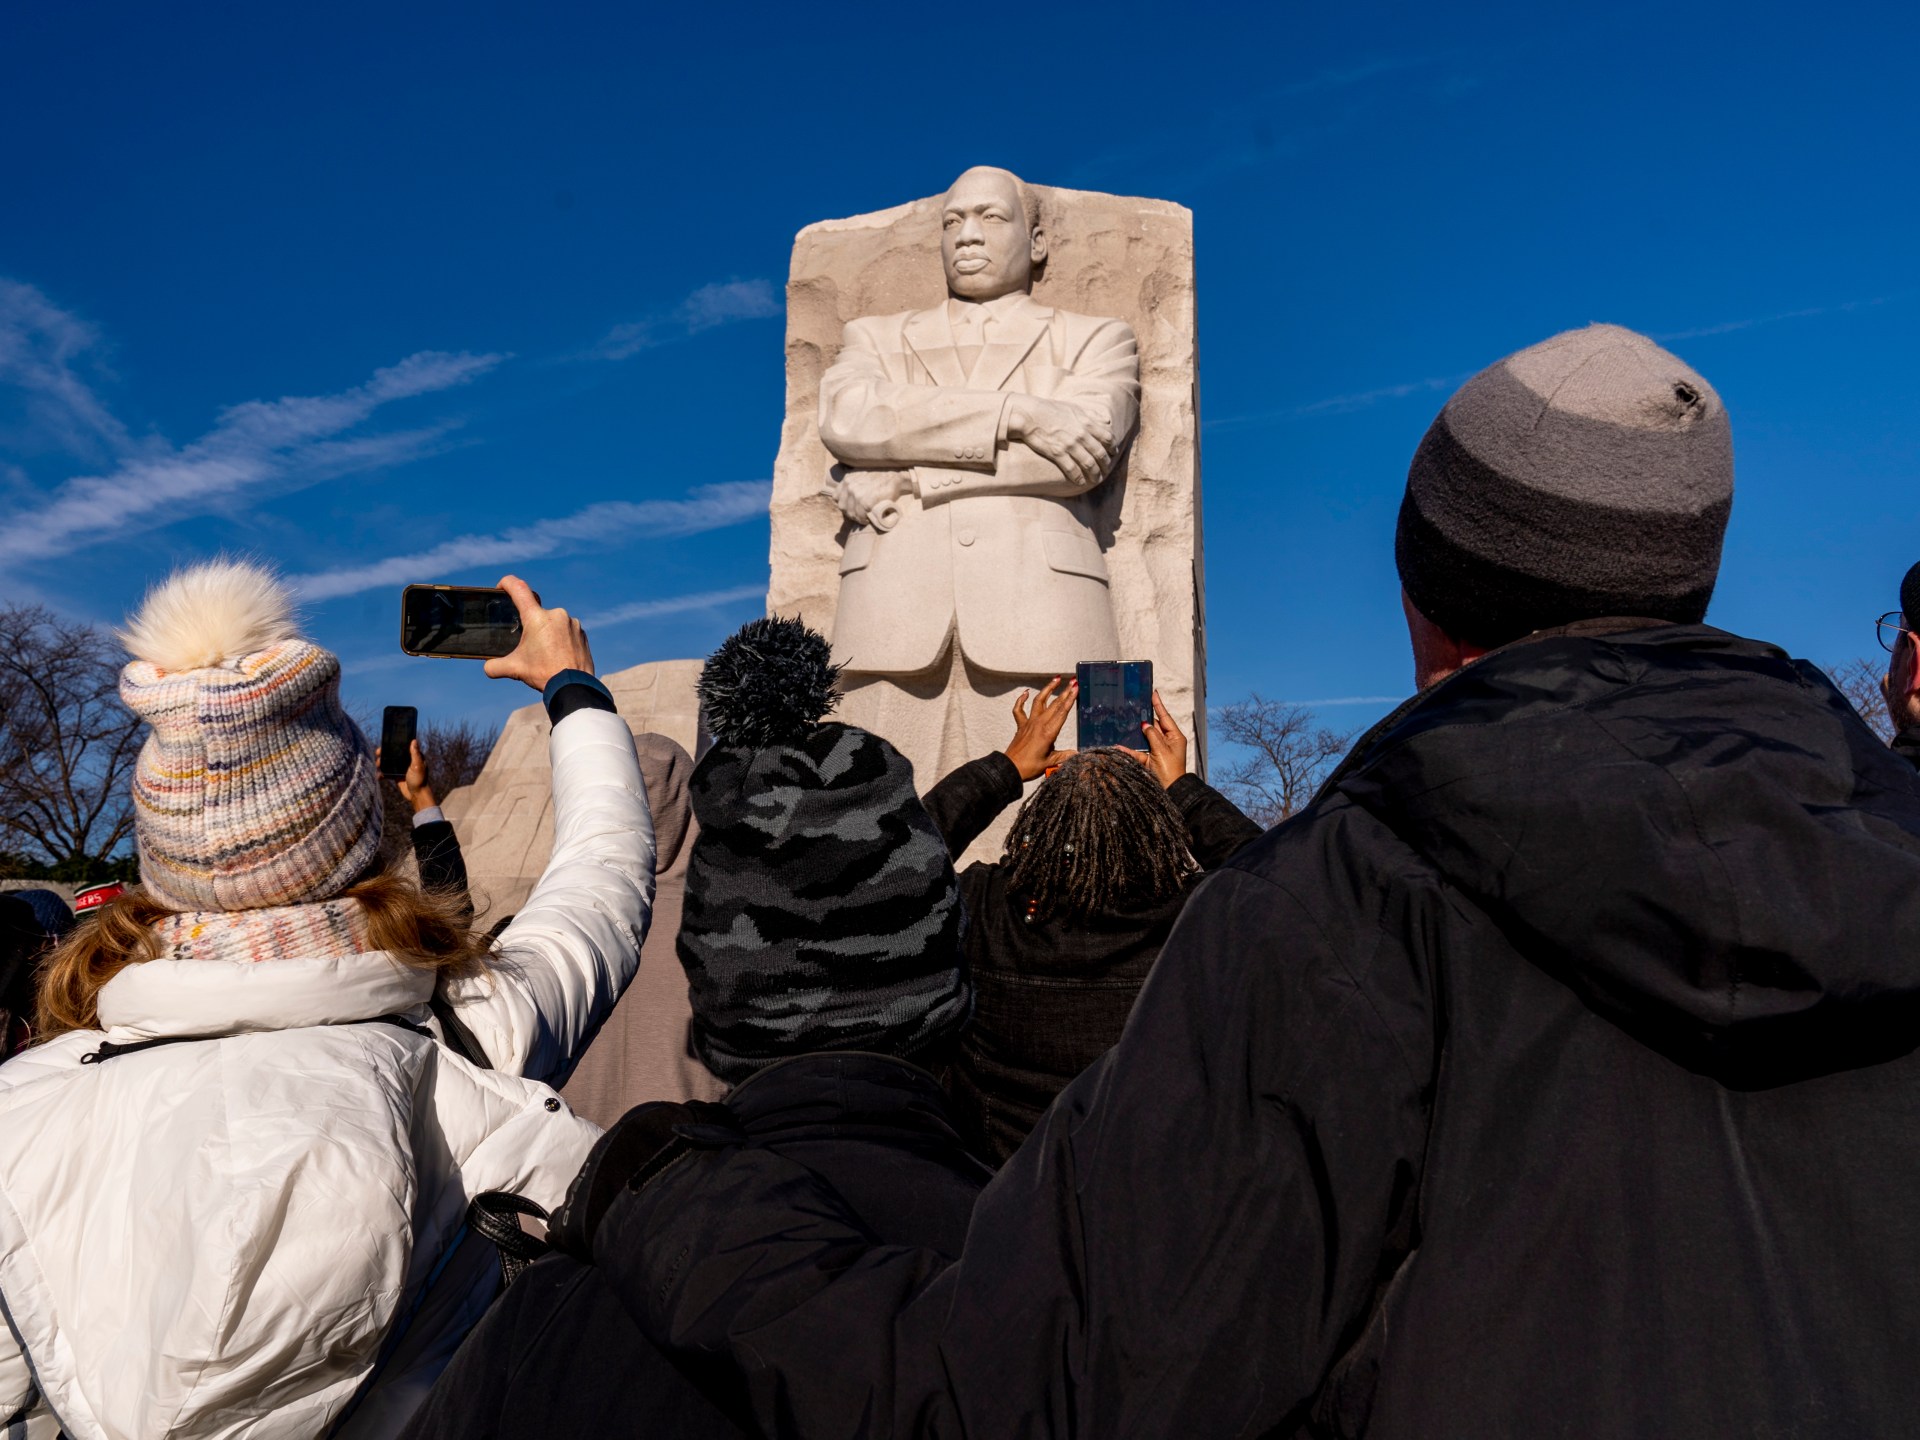 Martin Luther King Jr Day renews push to deal with racial injustice